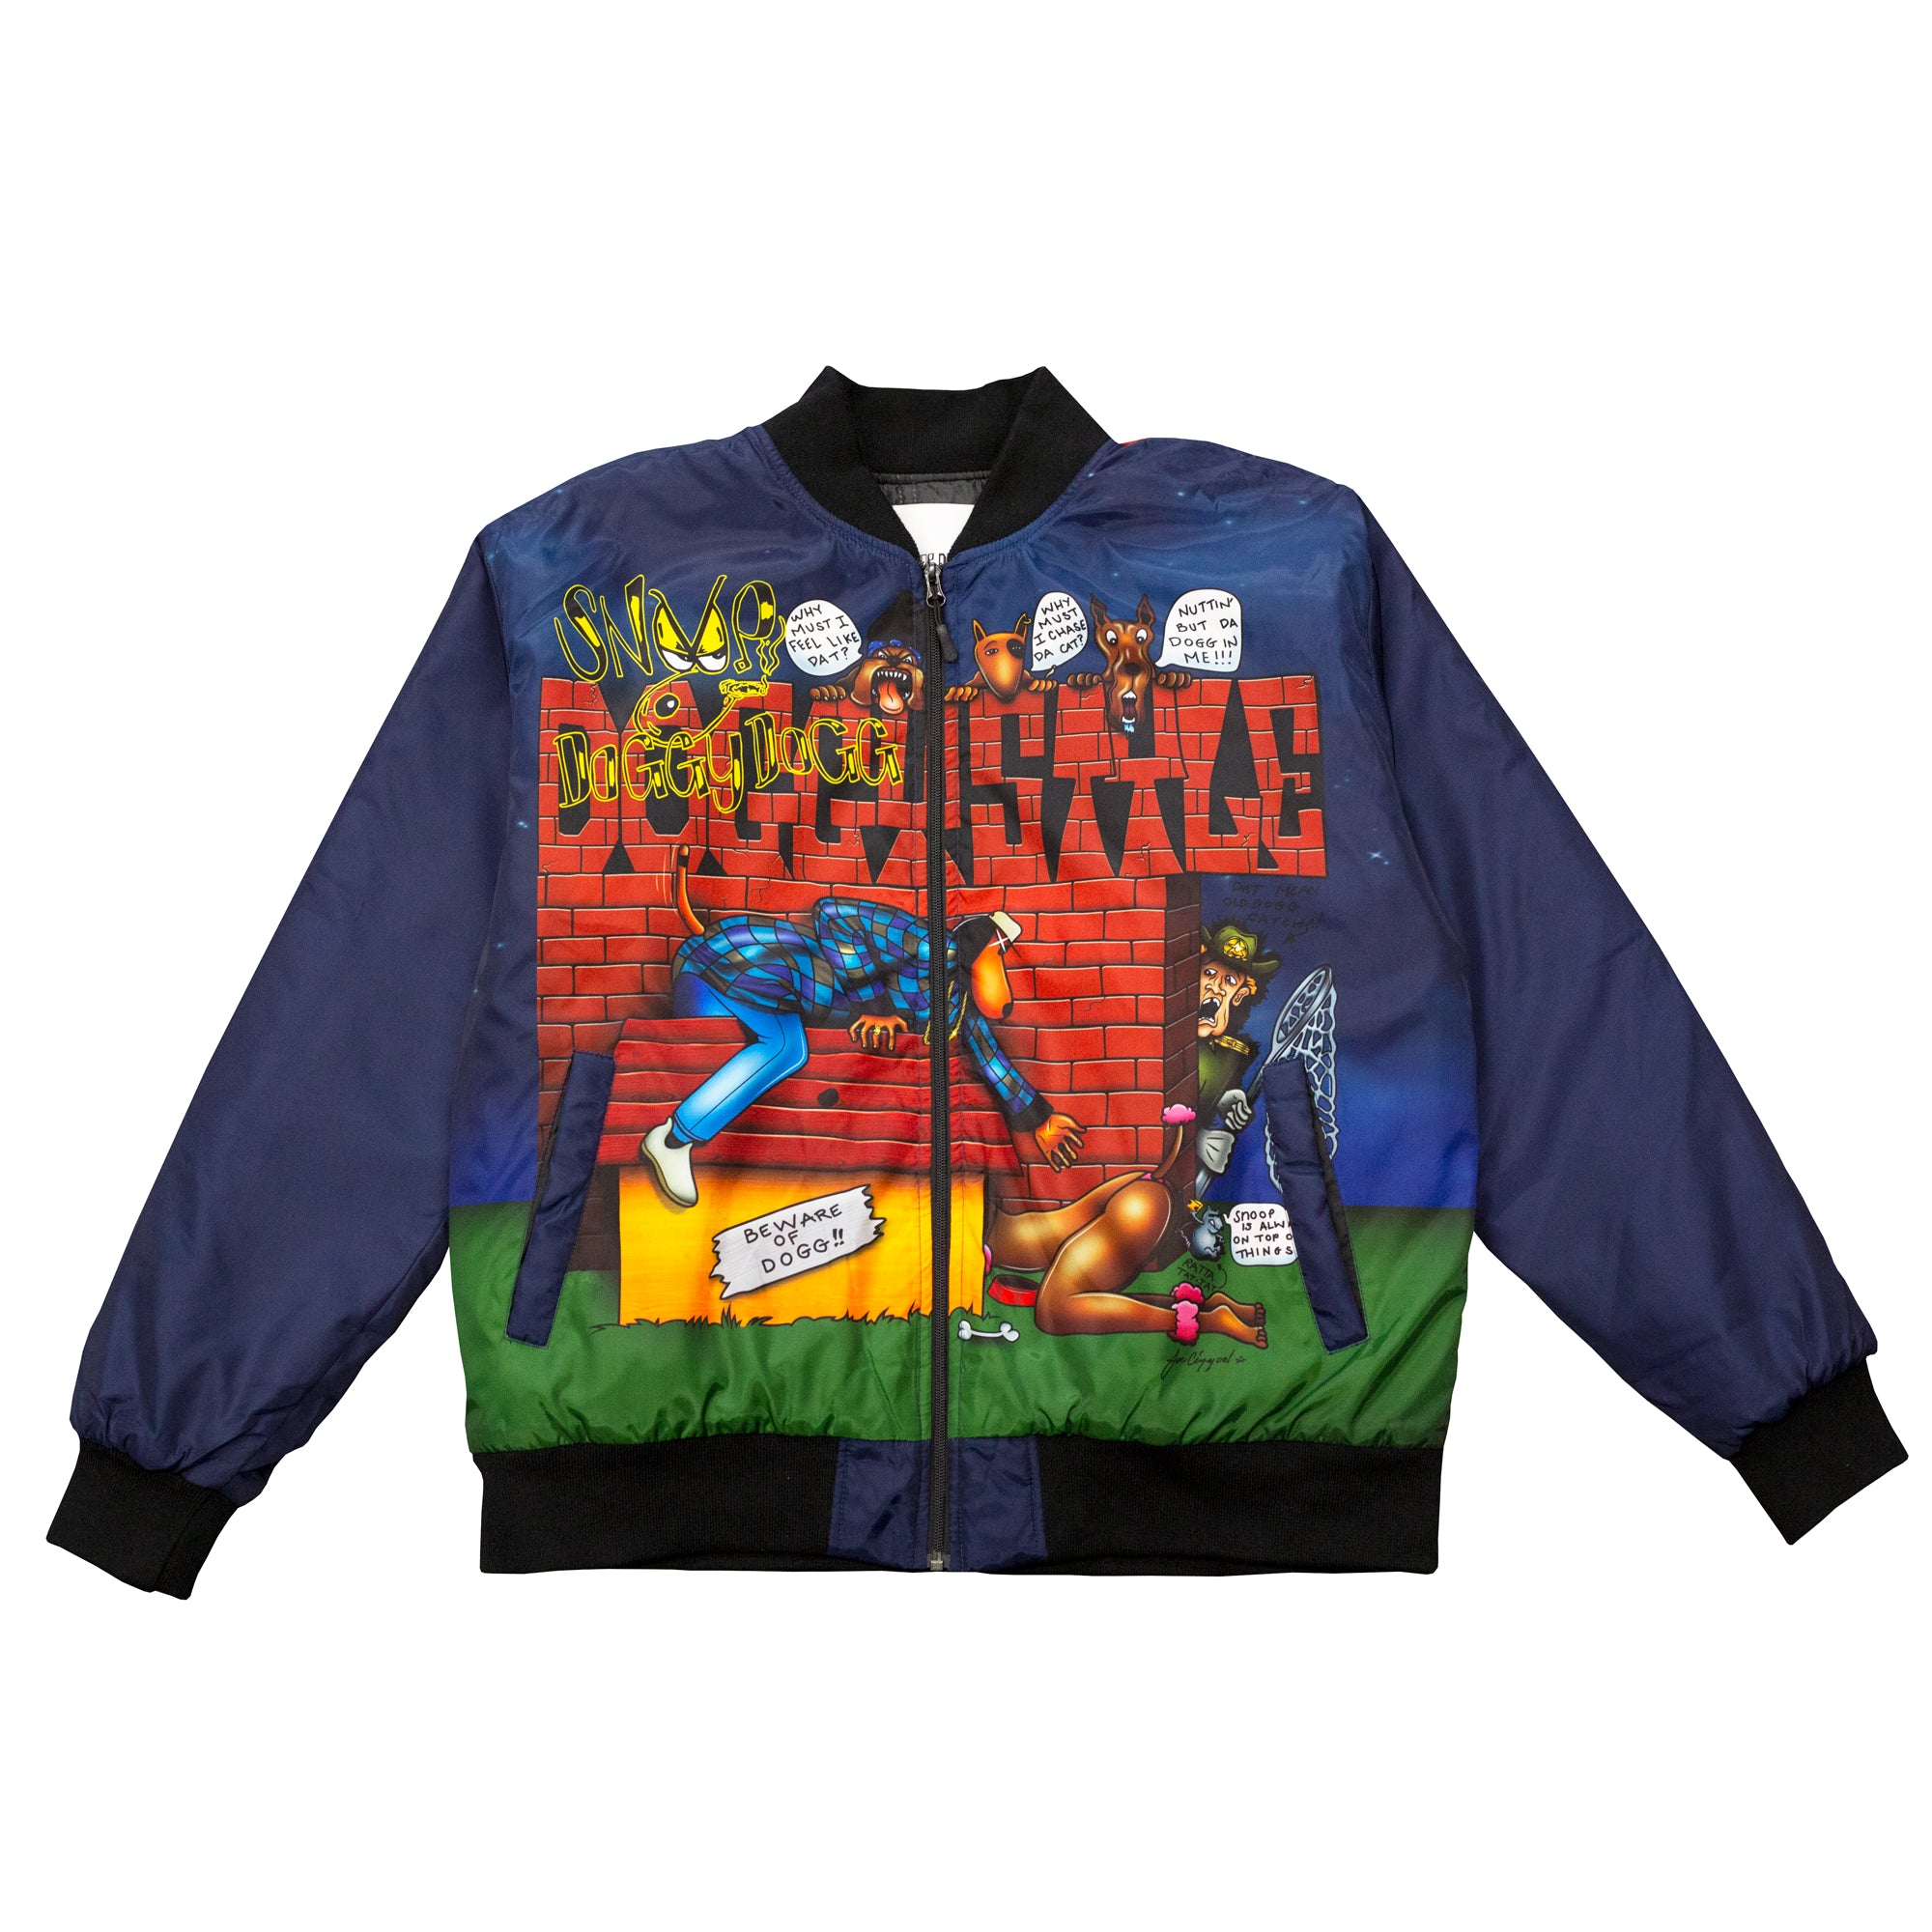 LIMITED TIME ONLY: DOGGYSTYLE BOMBER JACKET